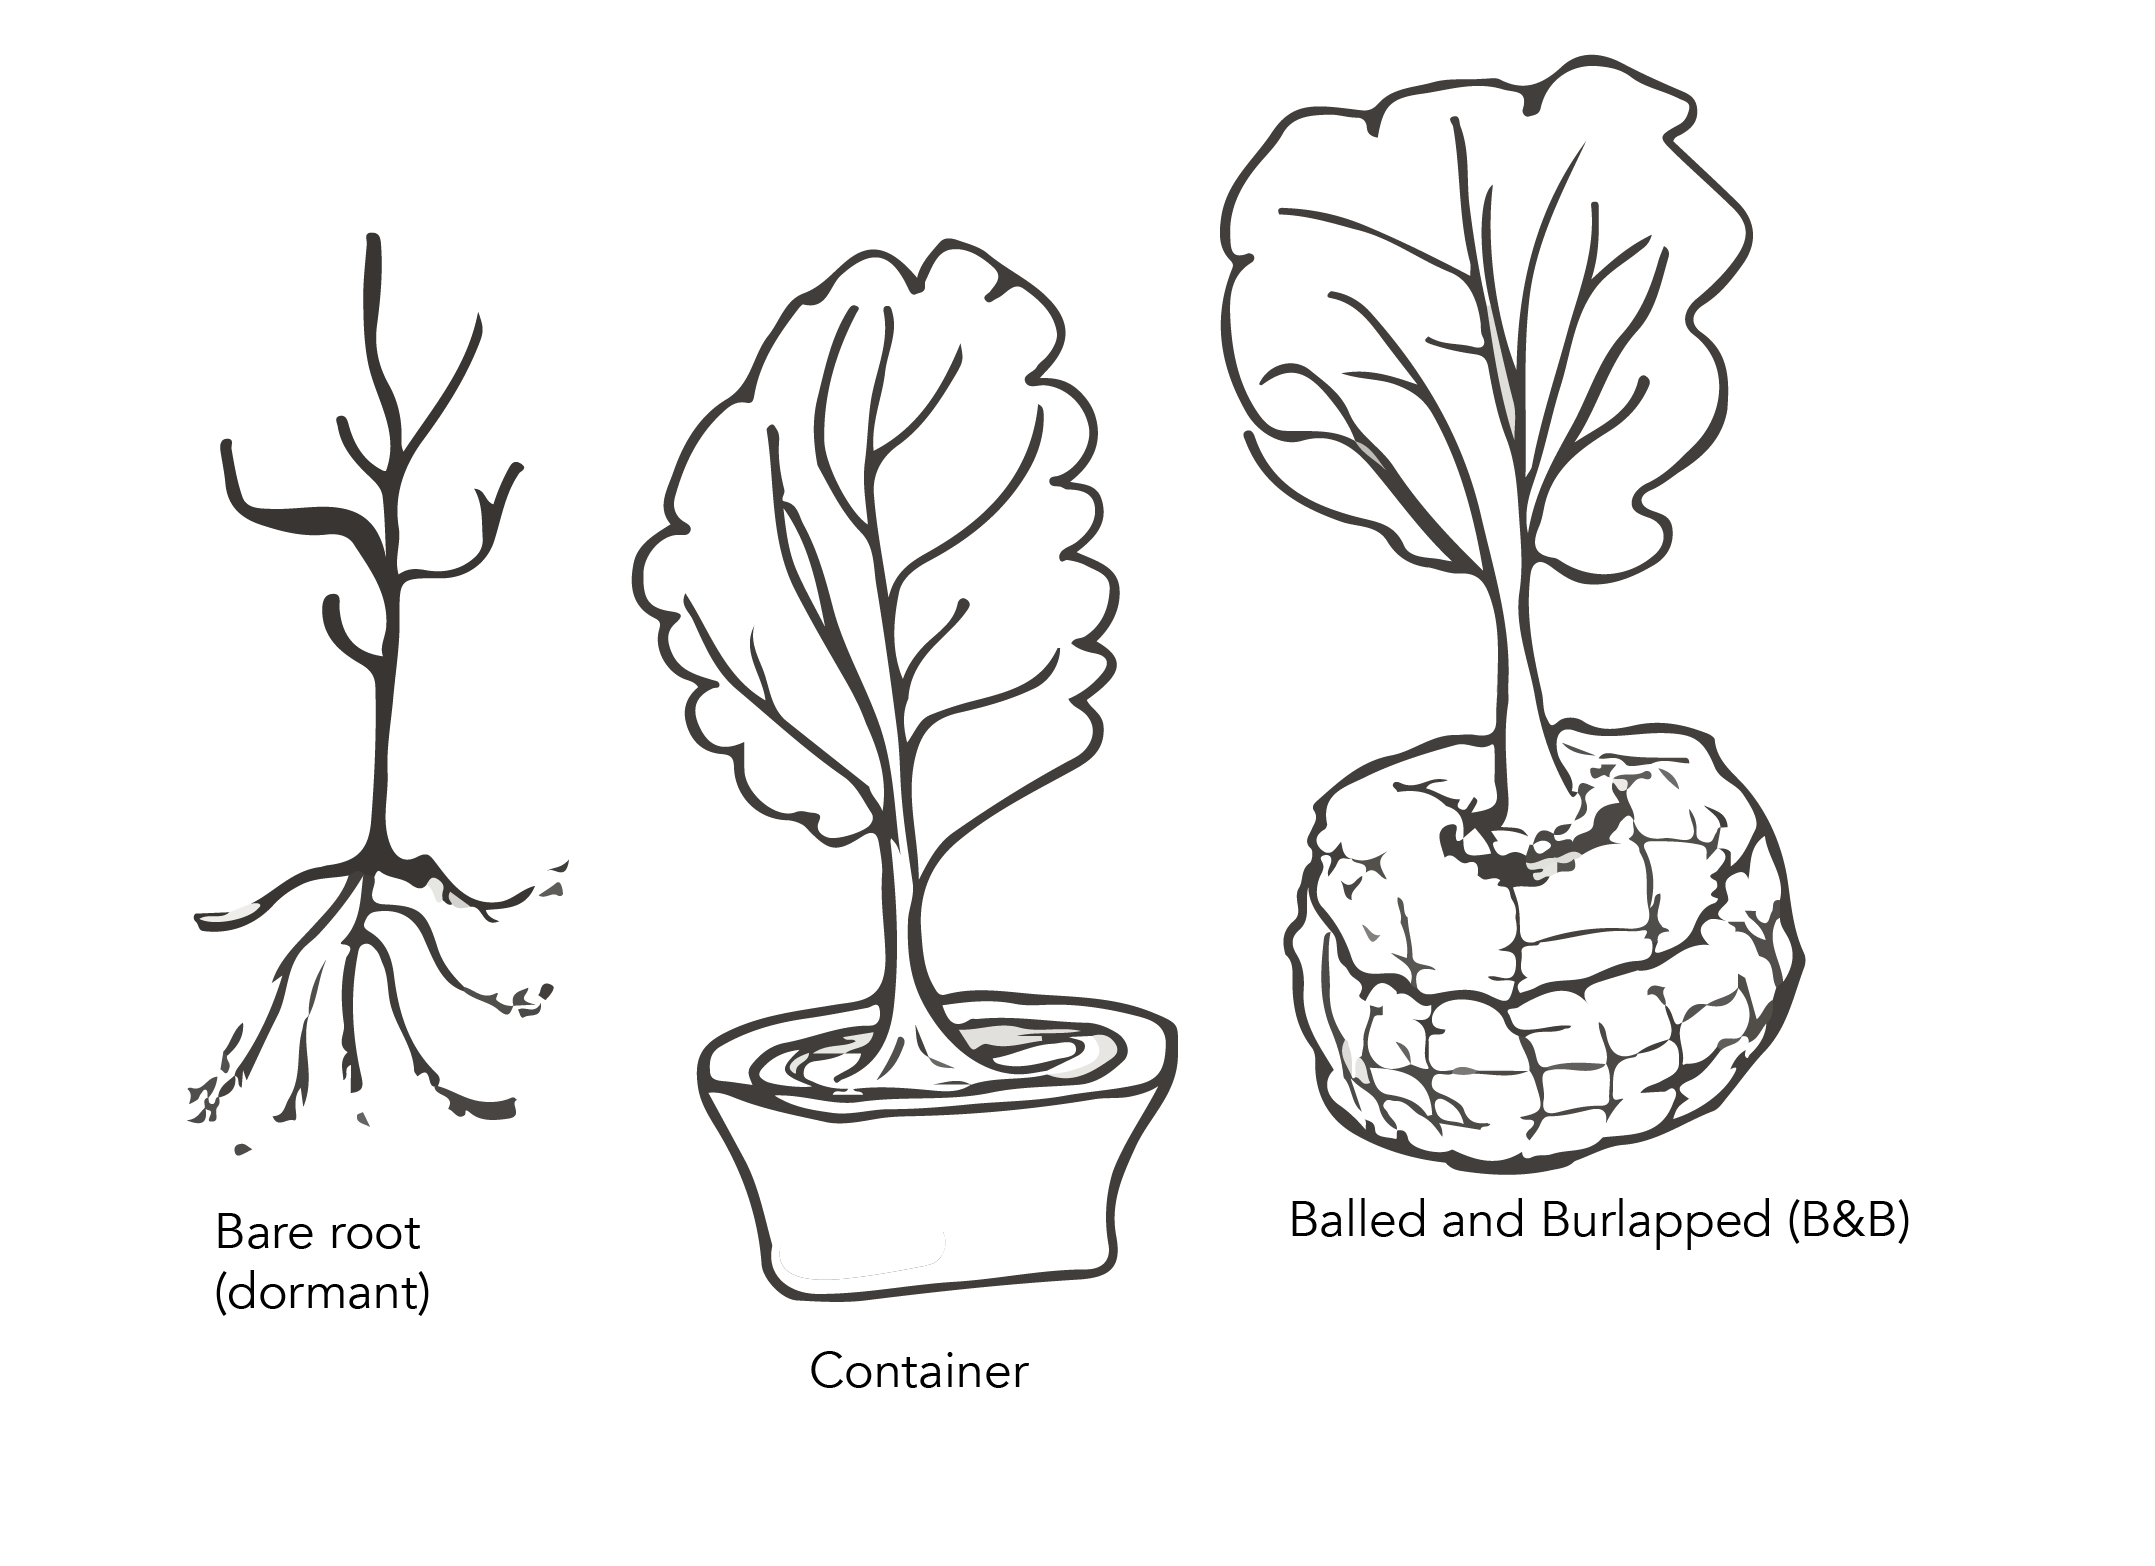 types of planting stock showing bare root, container, balled and burlapped